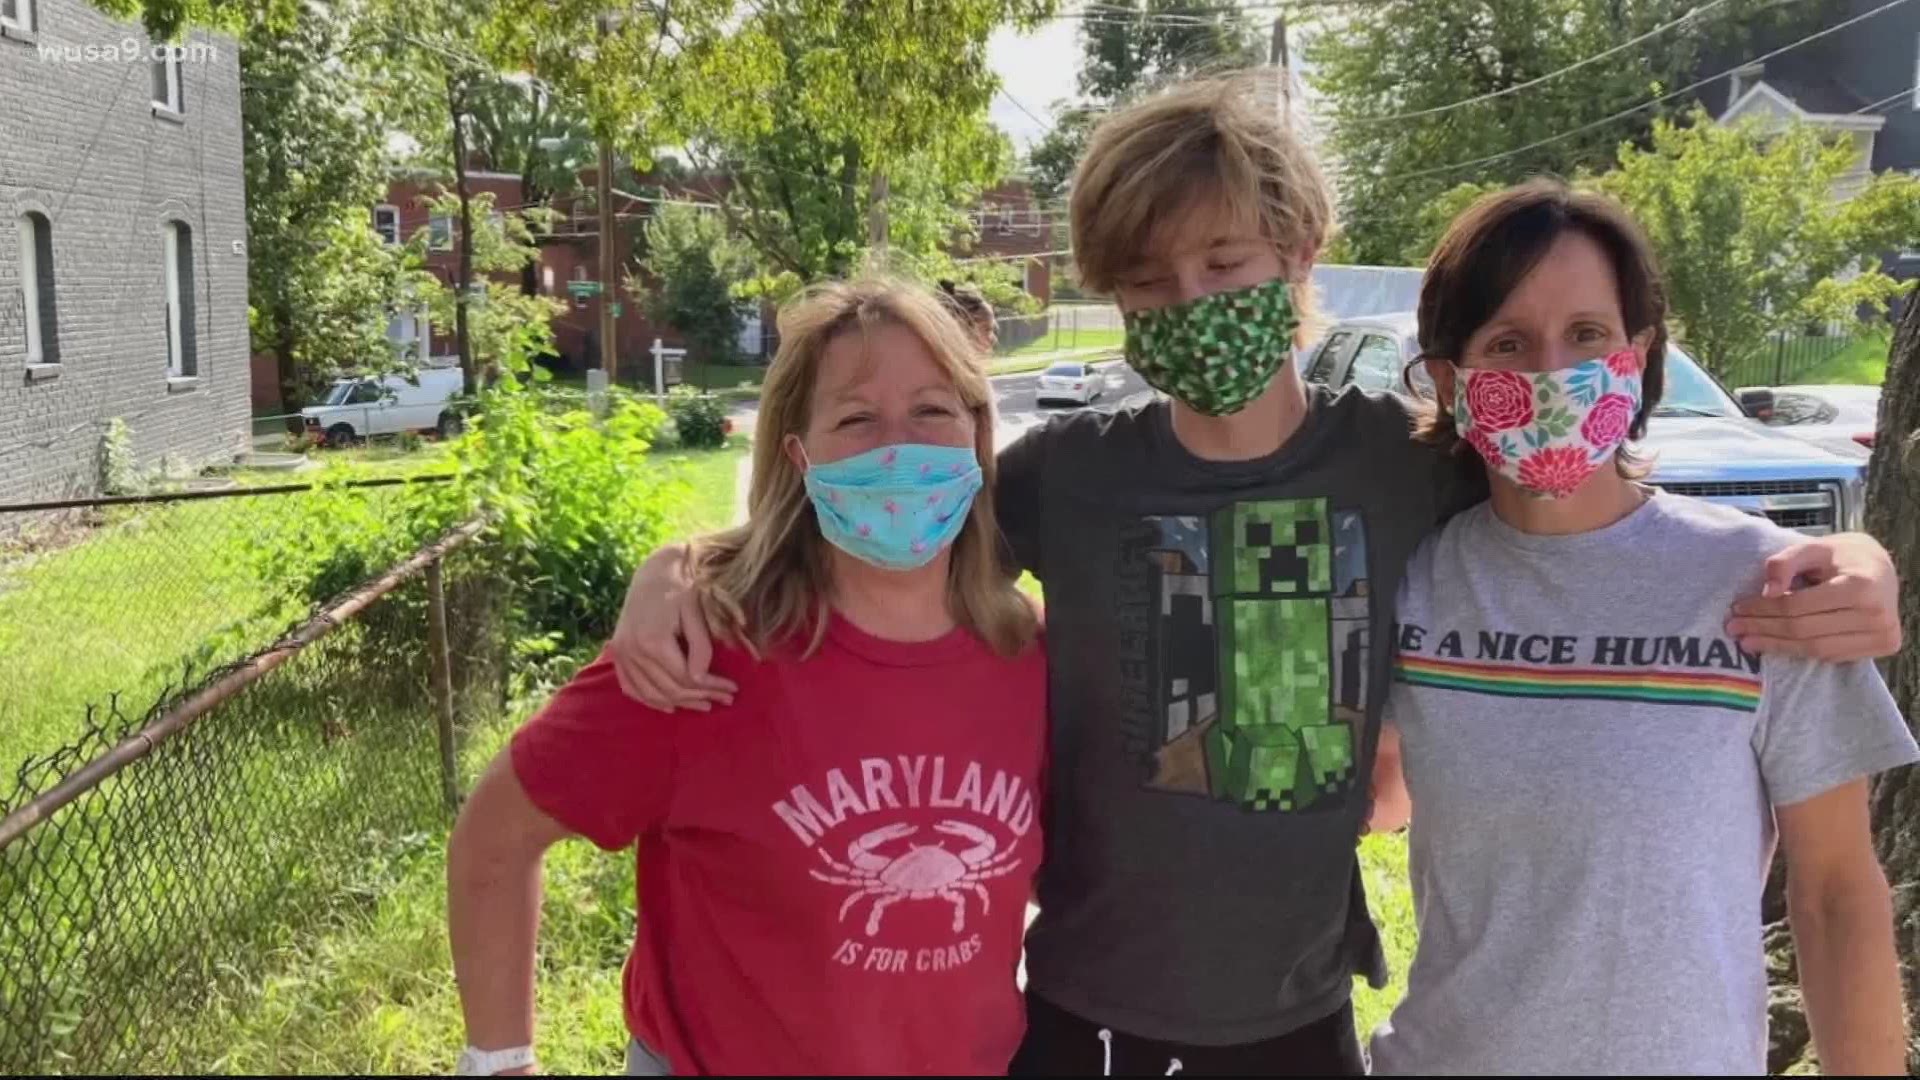 Luke O'Neil, 17, who has learning differences, says he shuts off his camera and mutes his microphone when his teacher insists he wear a mask in his virtual class.